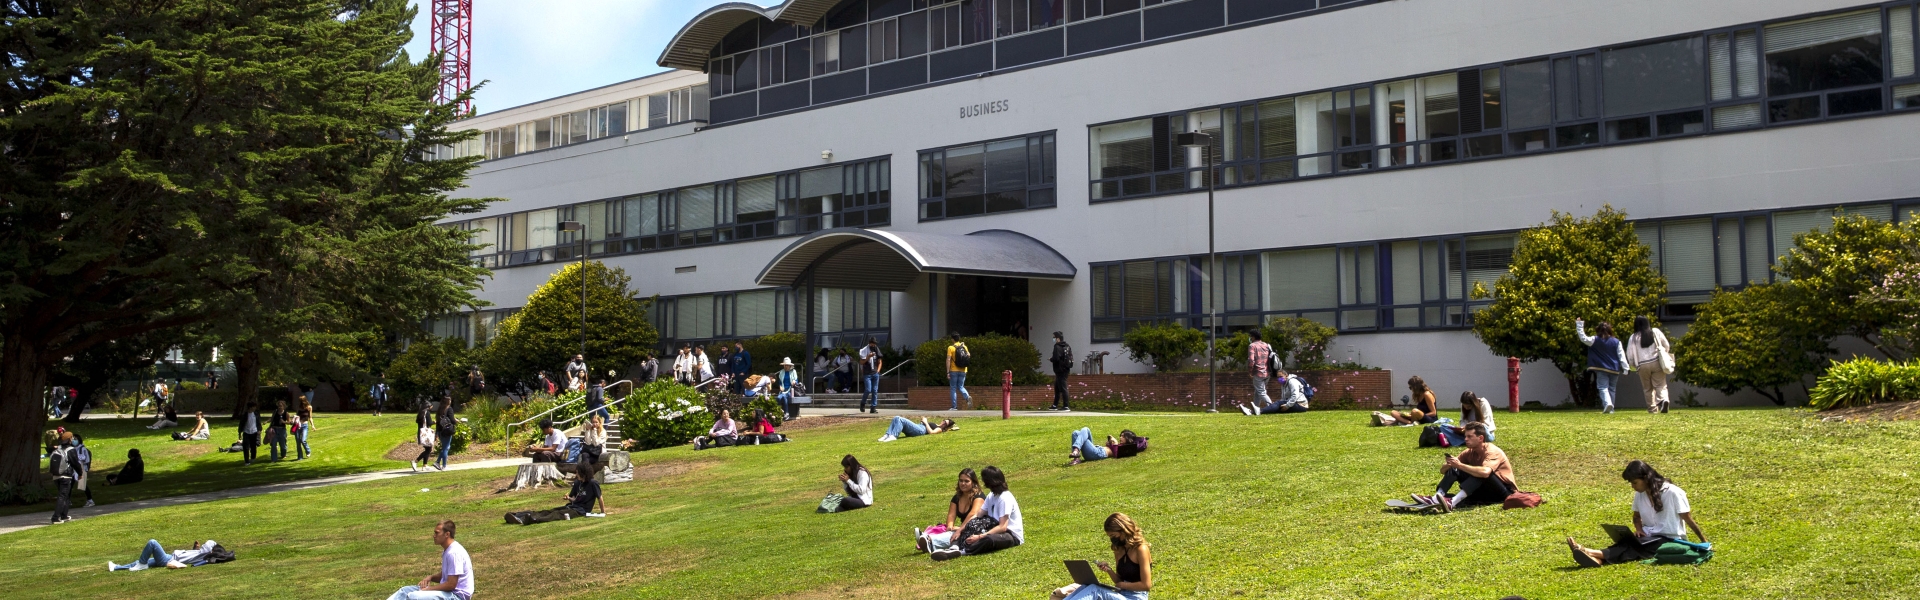 Business Building with students on lawn